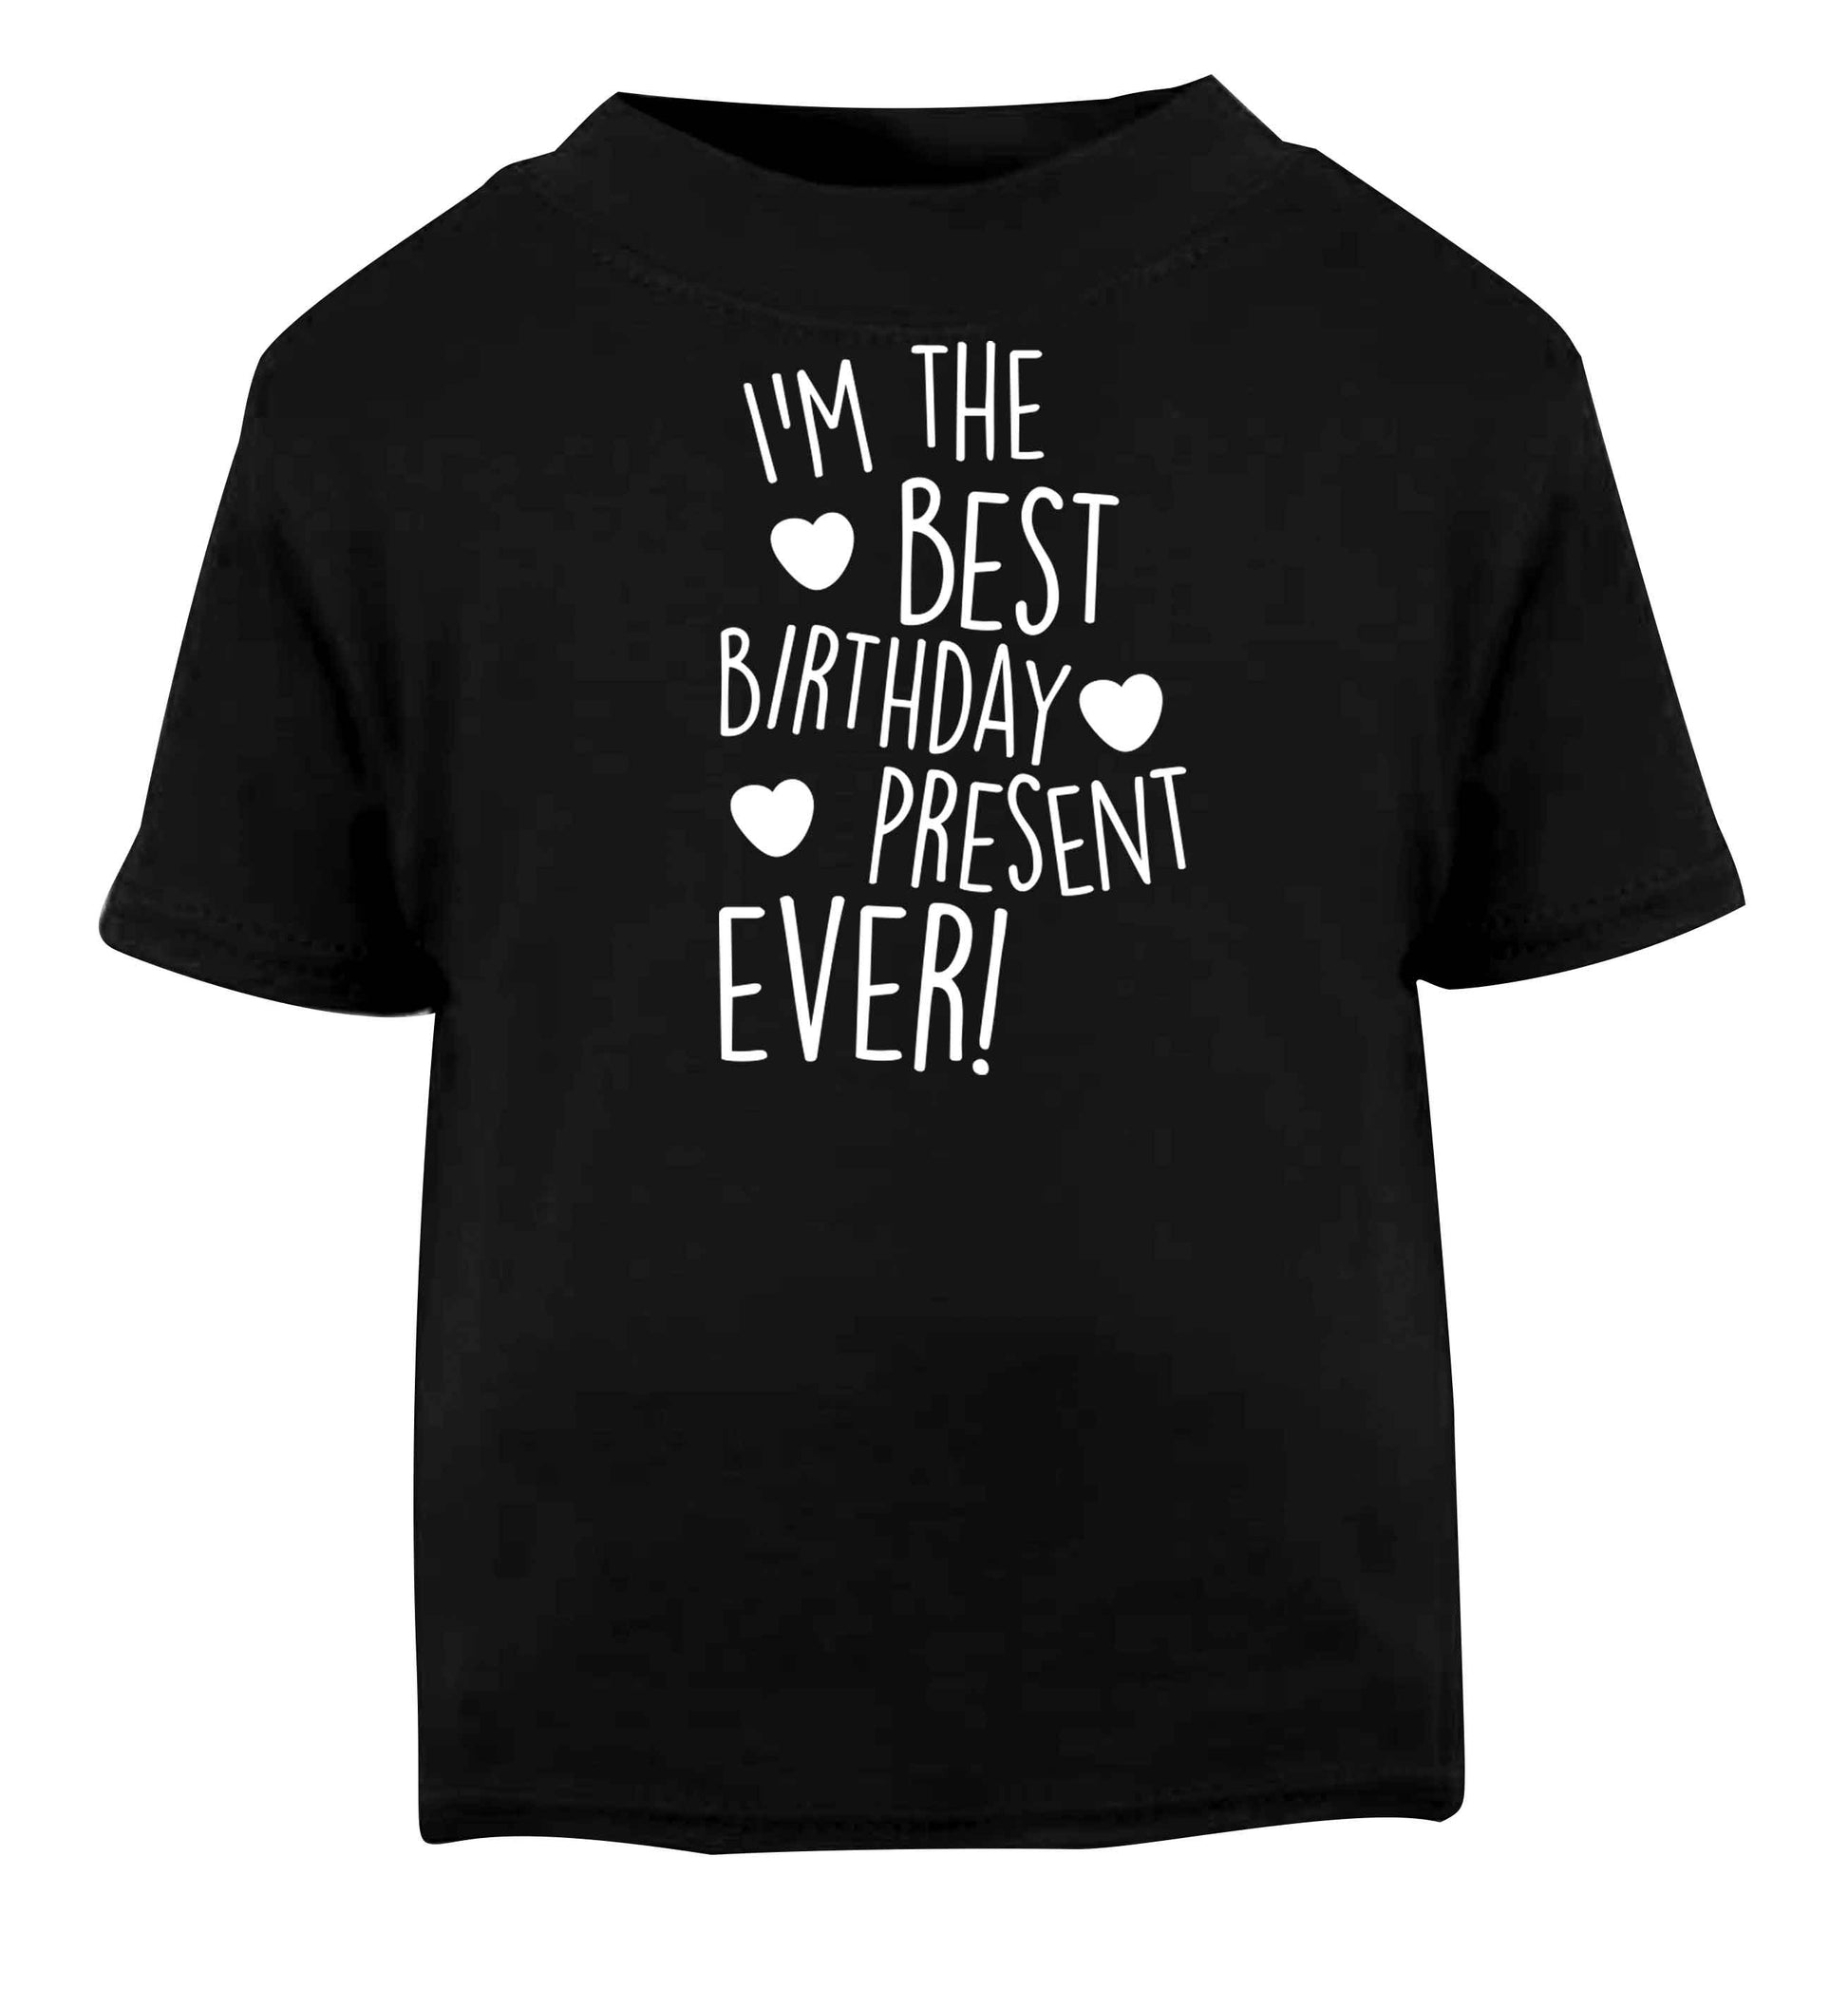 I'm the best birthday present ever Black baby toddler Tshirt 2 years